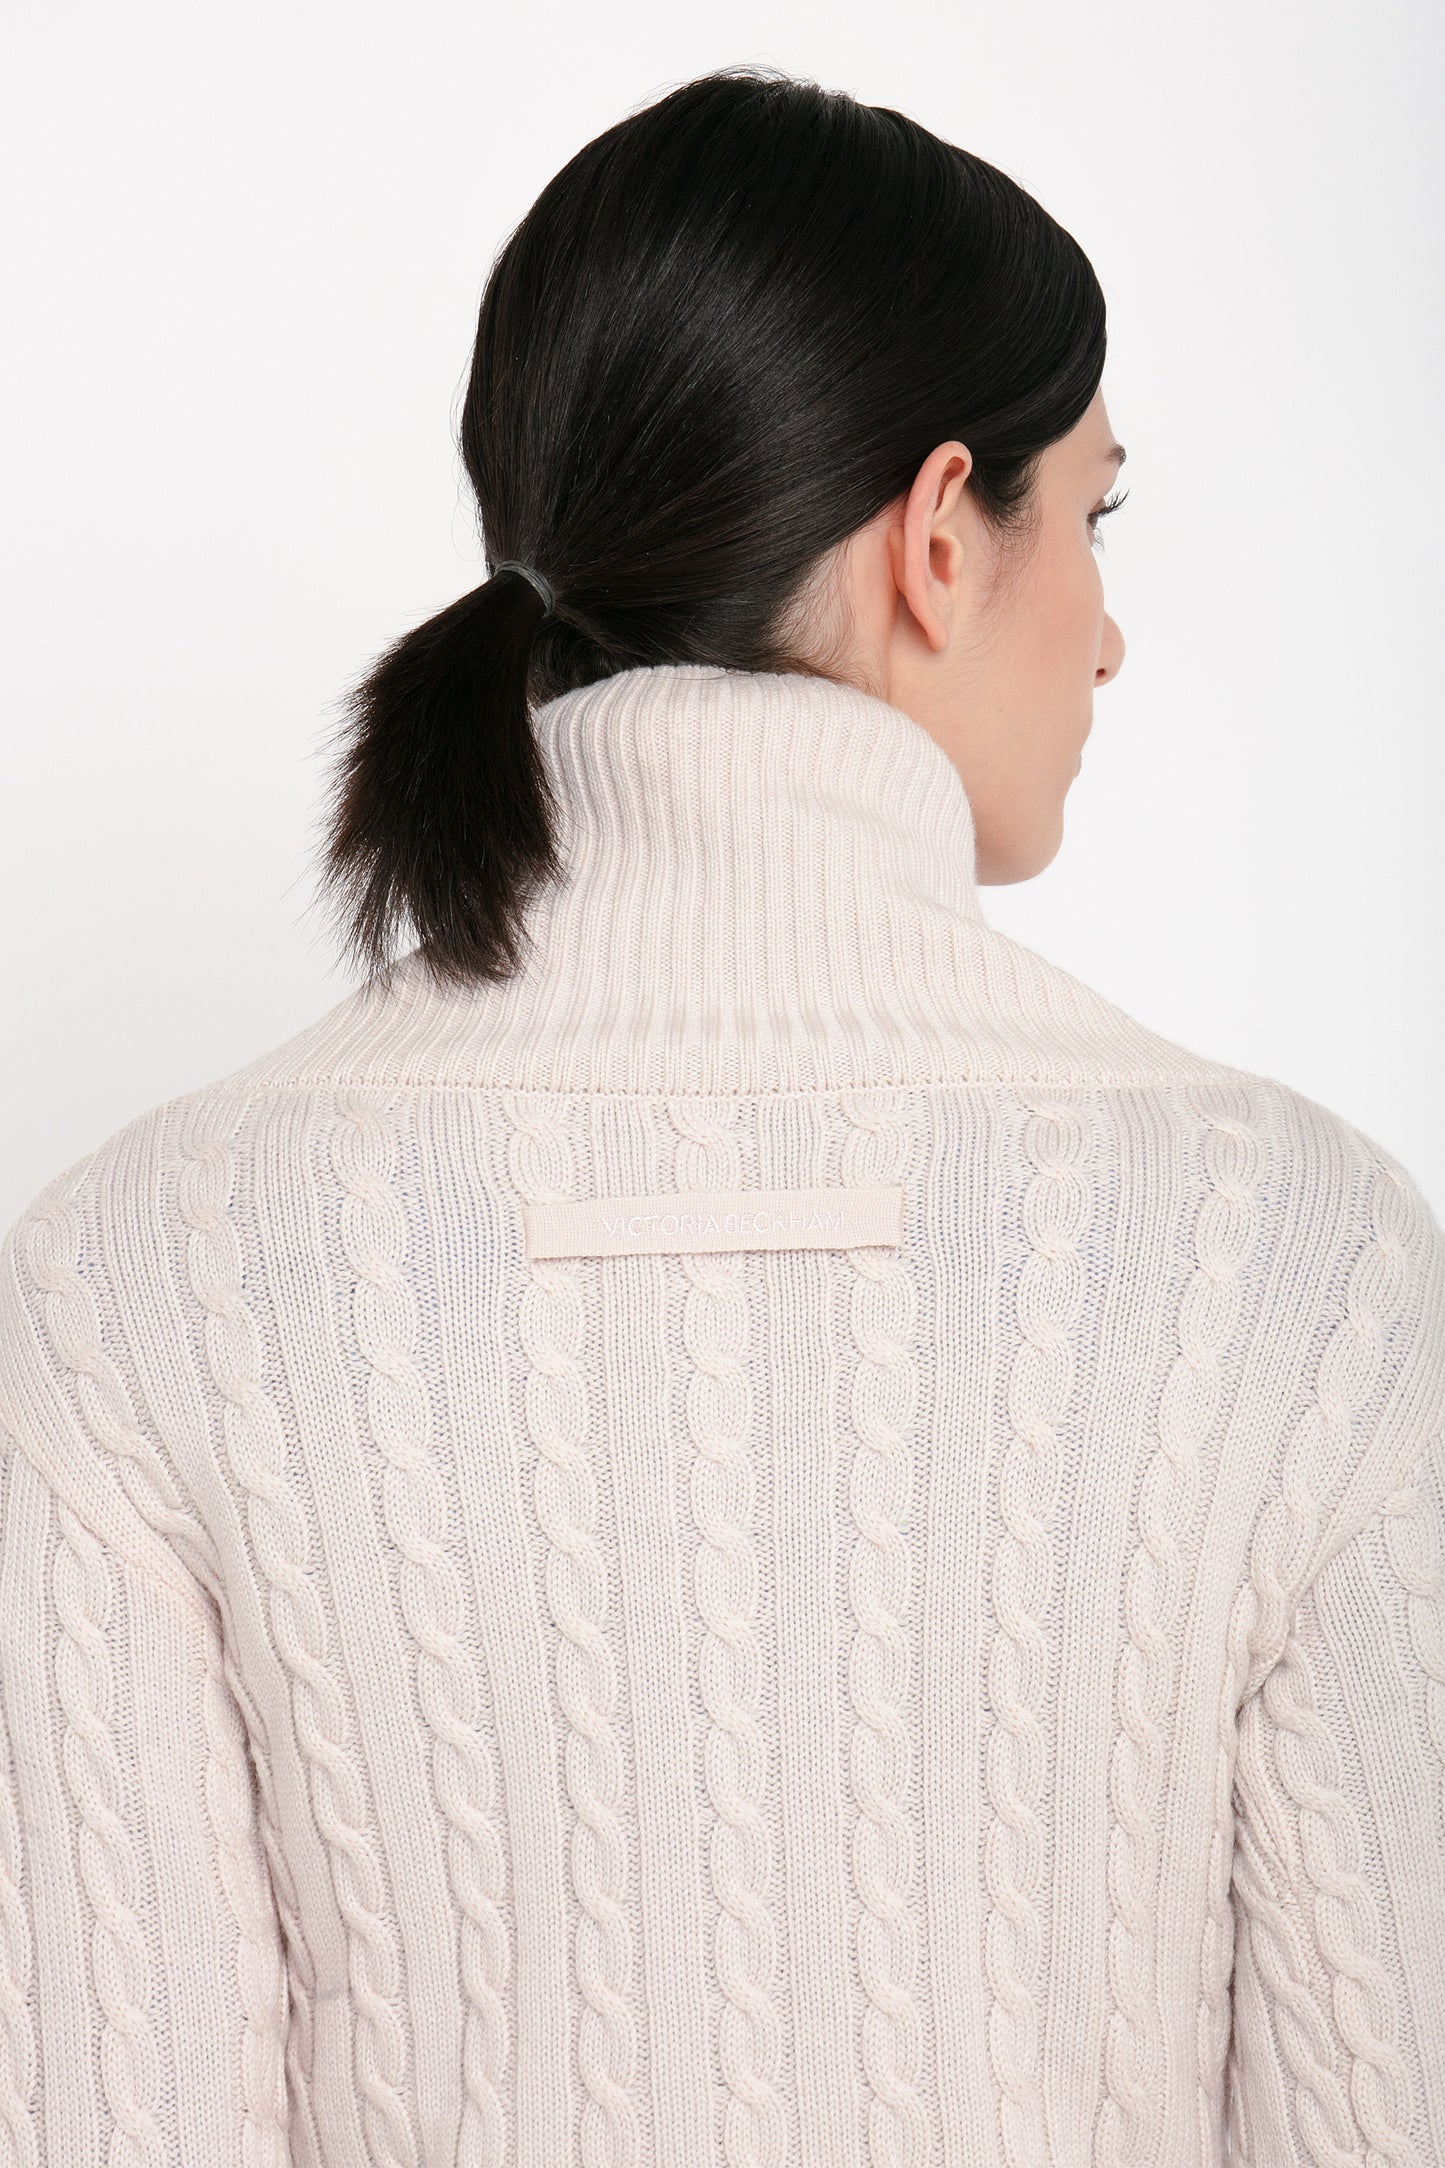 A person with dark brown hair tied in a low ponytail is wearing a Victoria Beckham Wrap Detail Jumper In Bone made from cozy cabled merino wool, seen from behind.